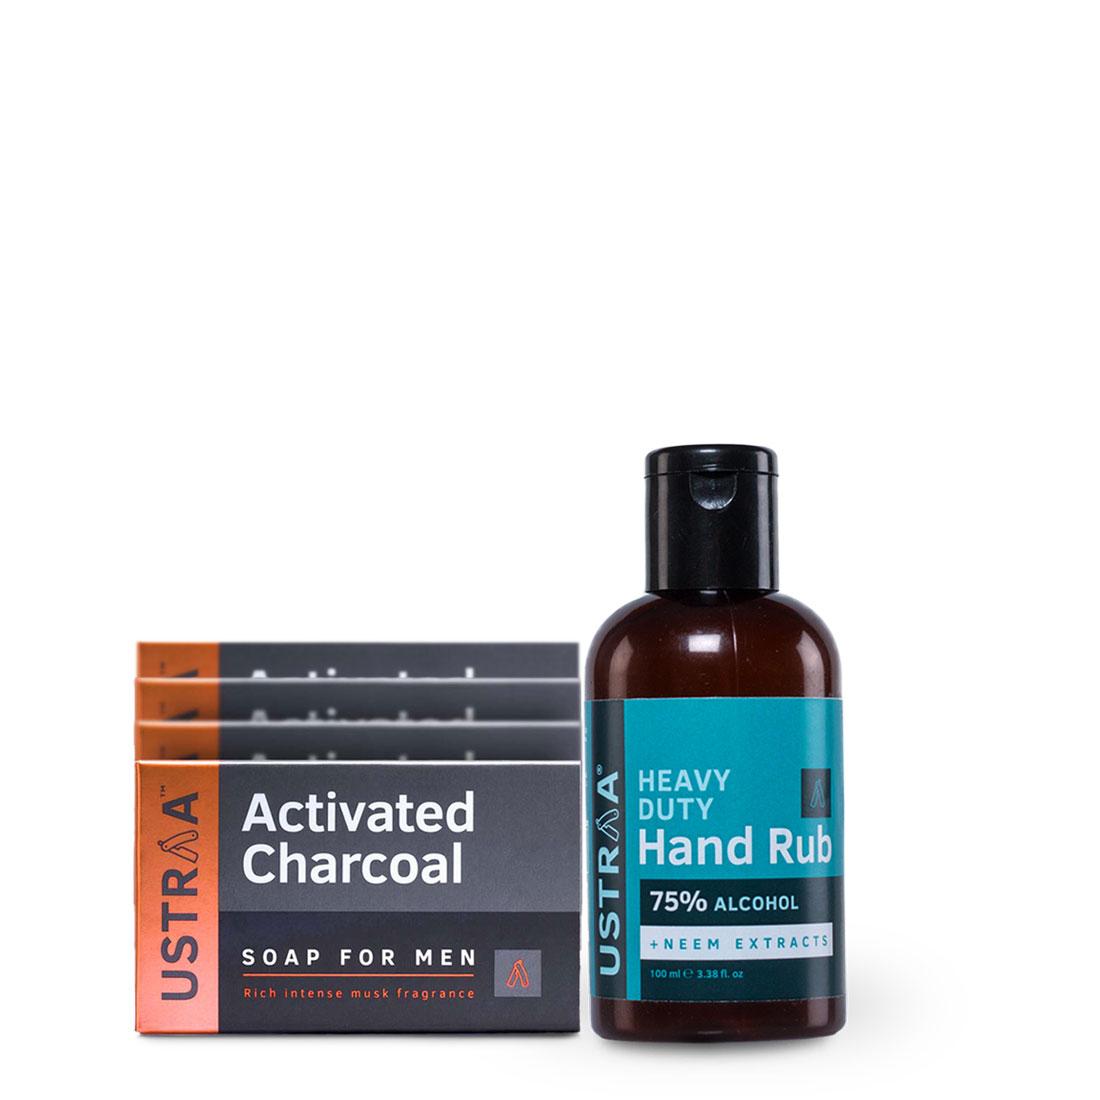 Deo Soap - Activated Charcoal - Pack of 4 & Hand Rub